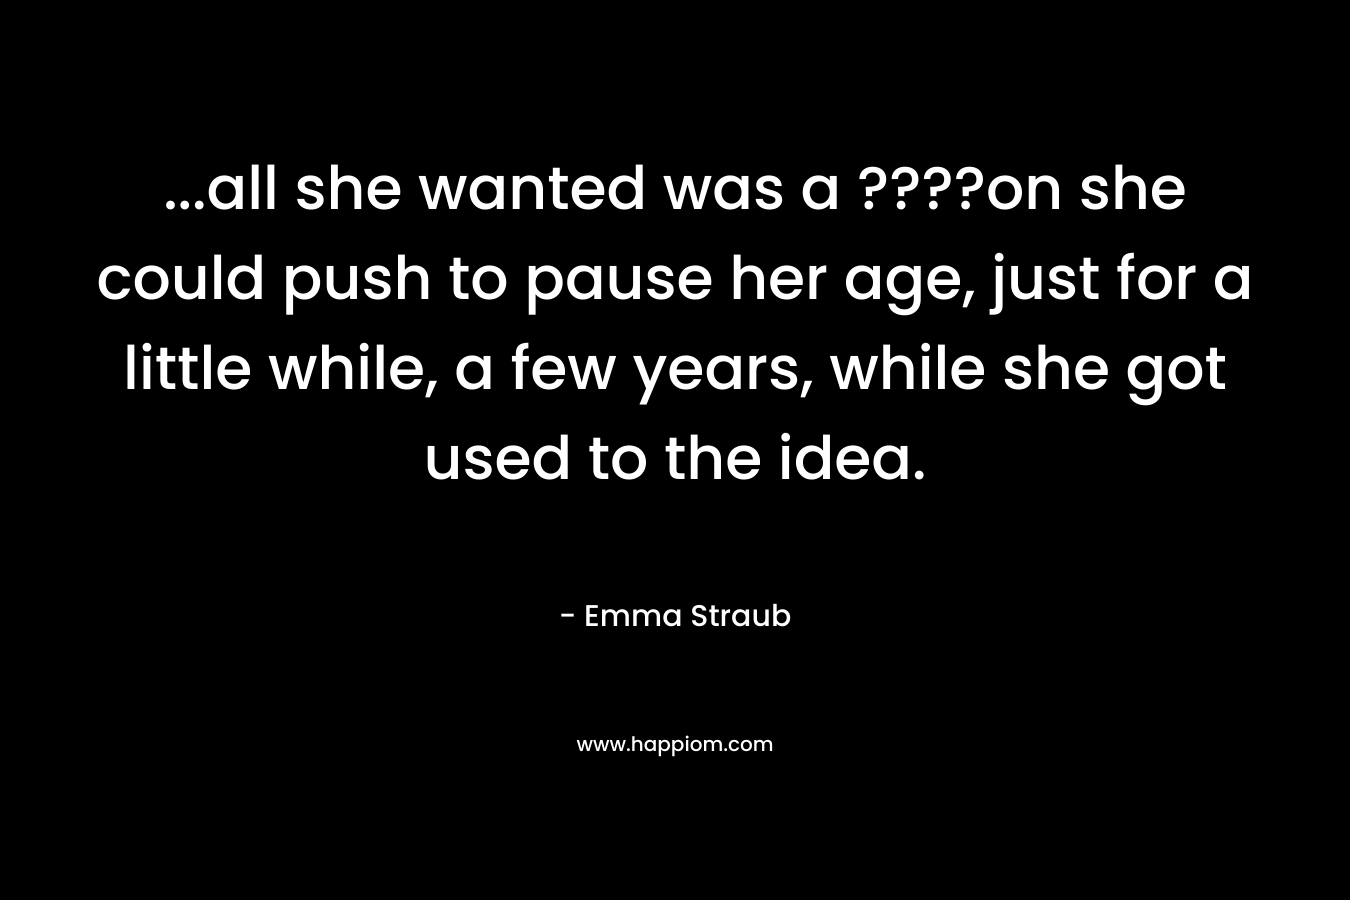 …all she wanted was a ????on she could push to pause her age, just for a little while, a few years, while she got used to the idea. – Emma Straub